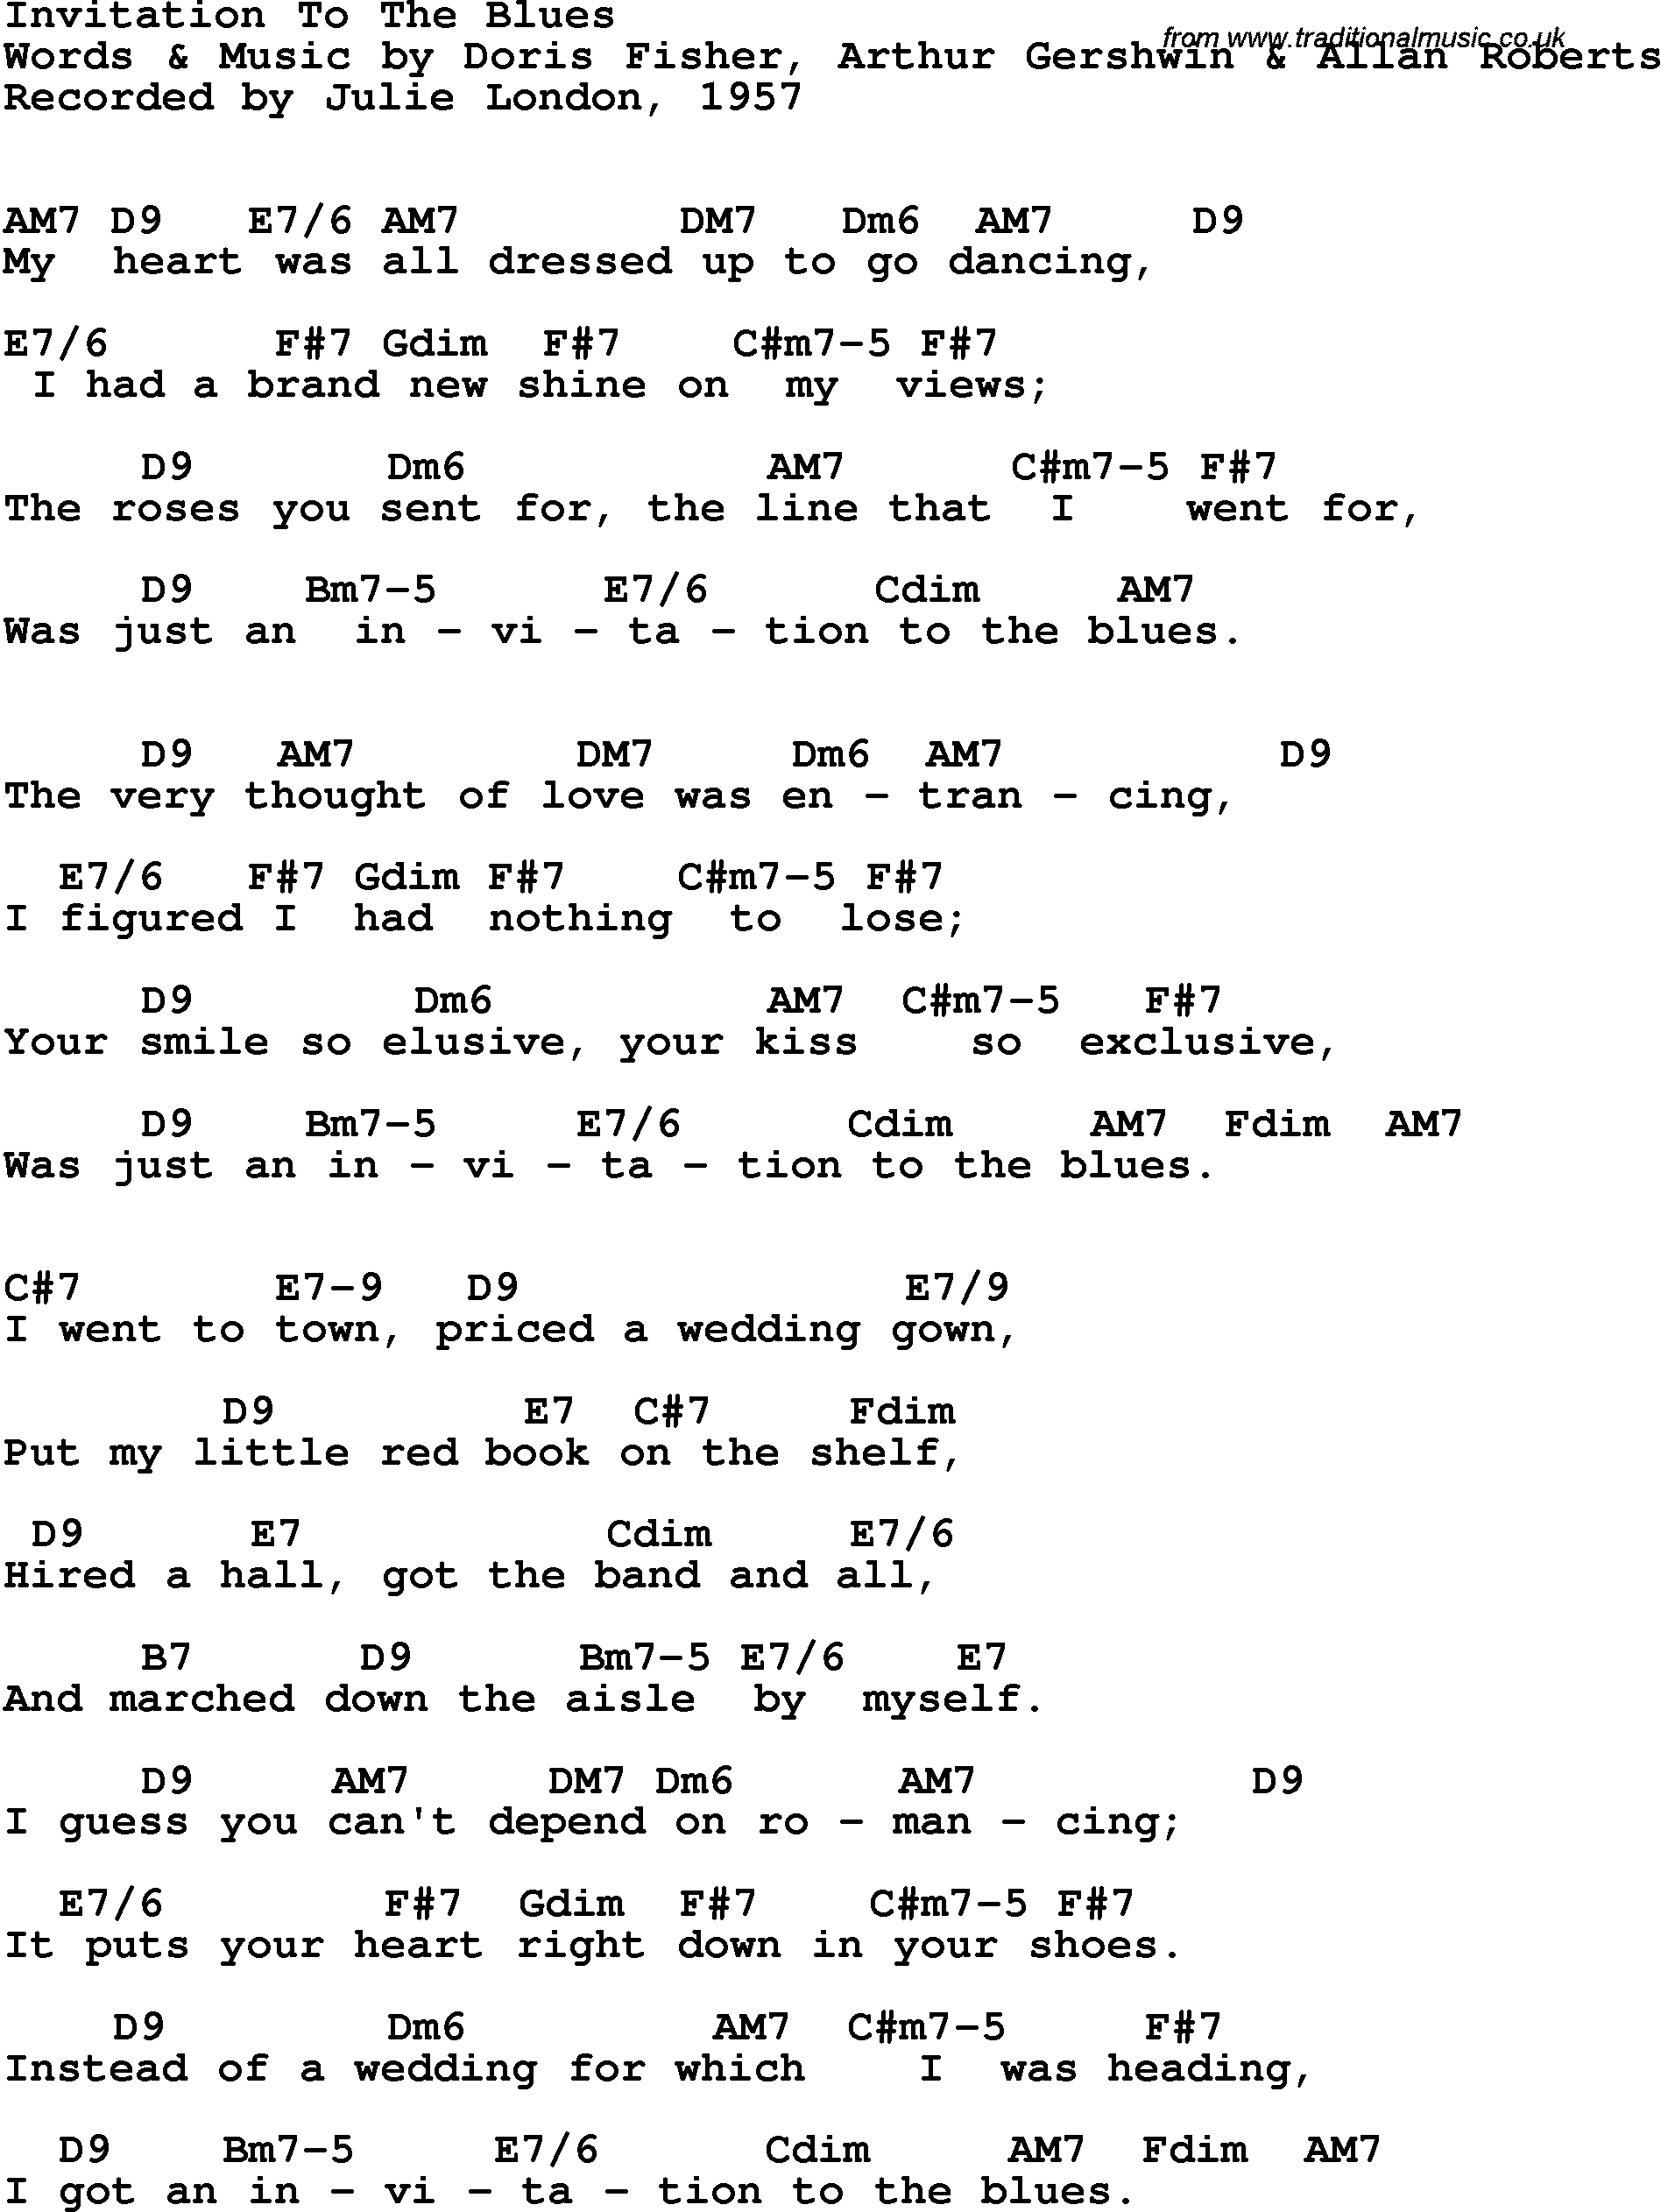 Song Lyrics with guitar chords for Invitation To The Blues - Julie London, 1957